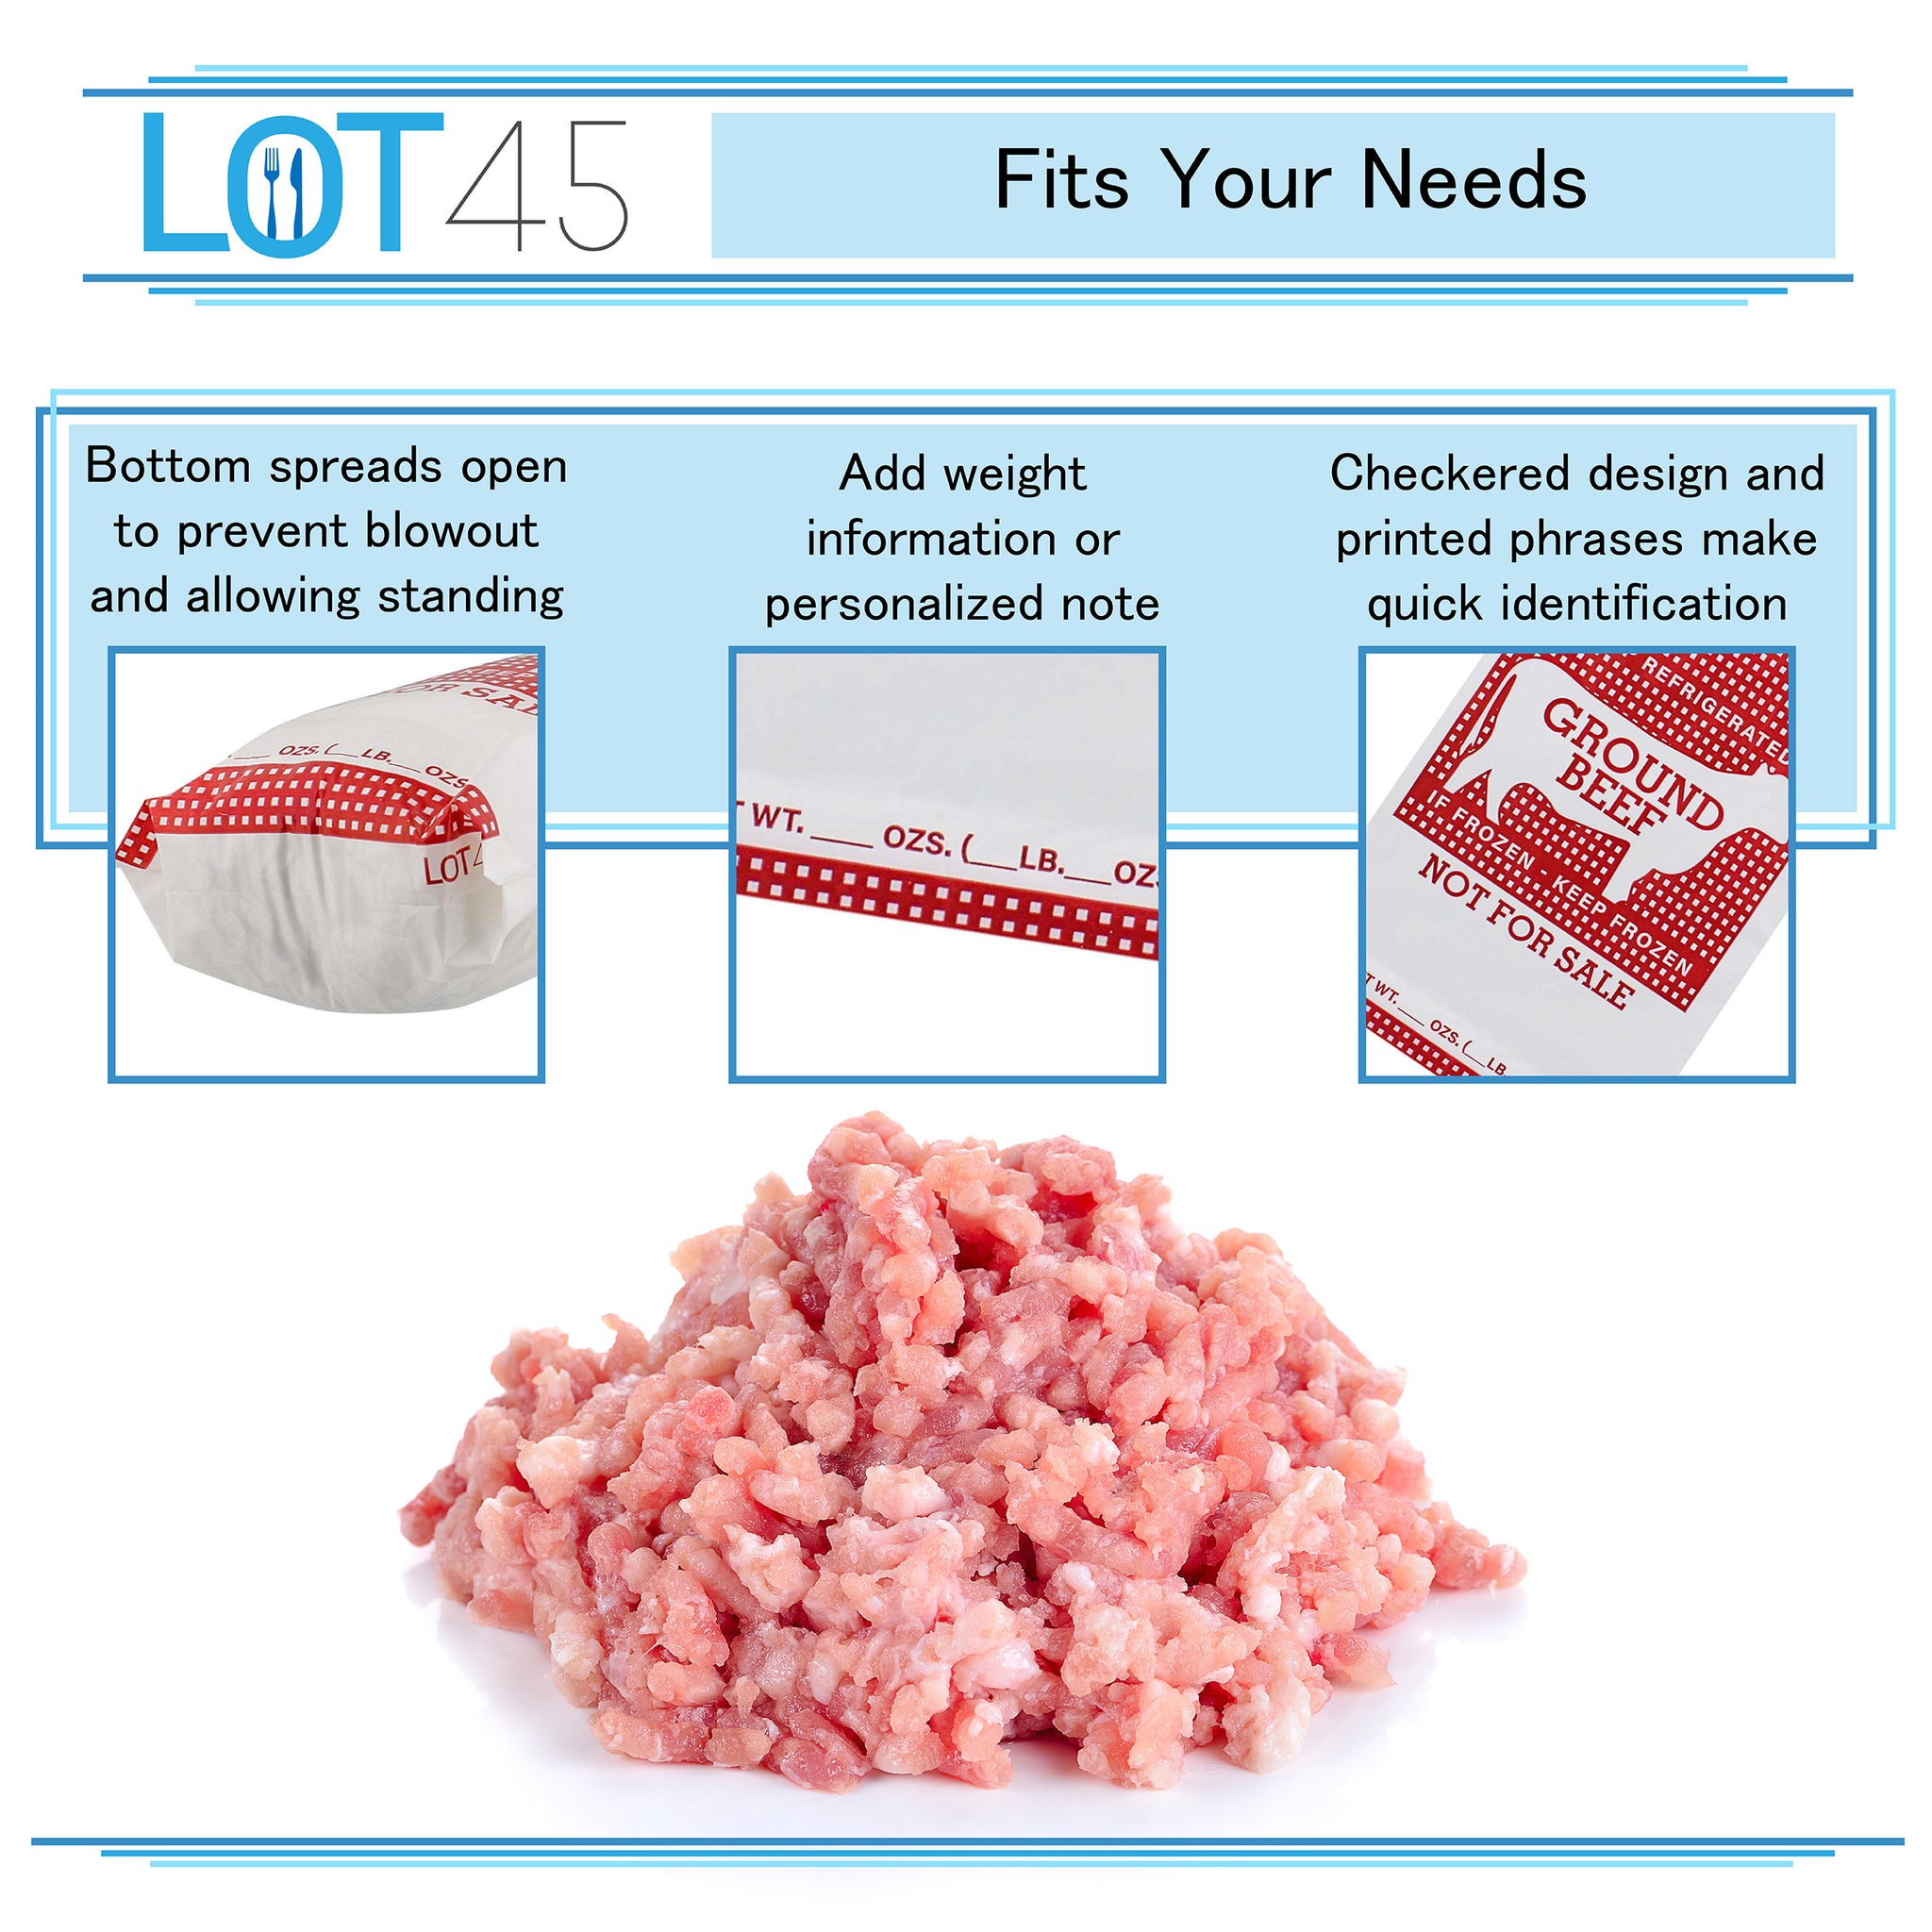 1lb Ground Beef Meat Bags